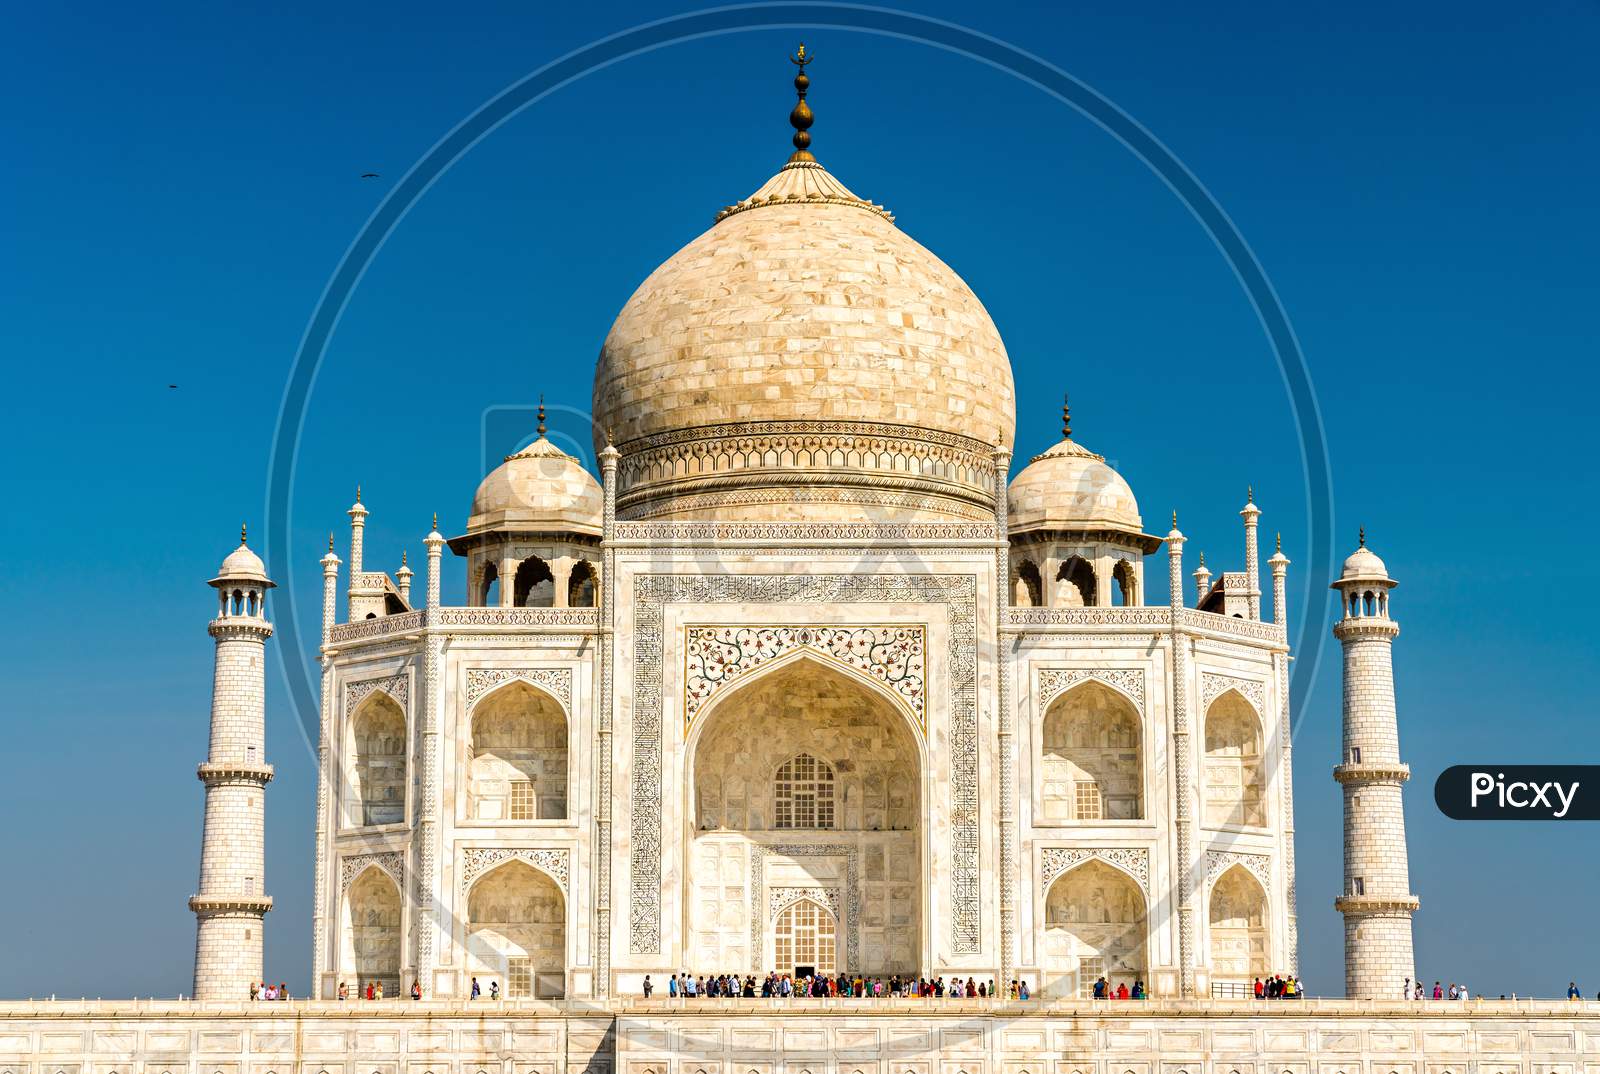 Download Taj Mahal images | 51 HD pictures and stock photos